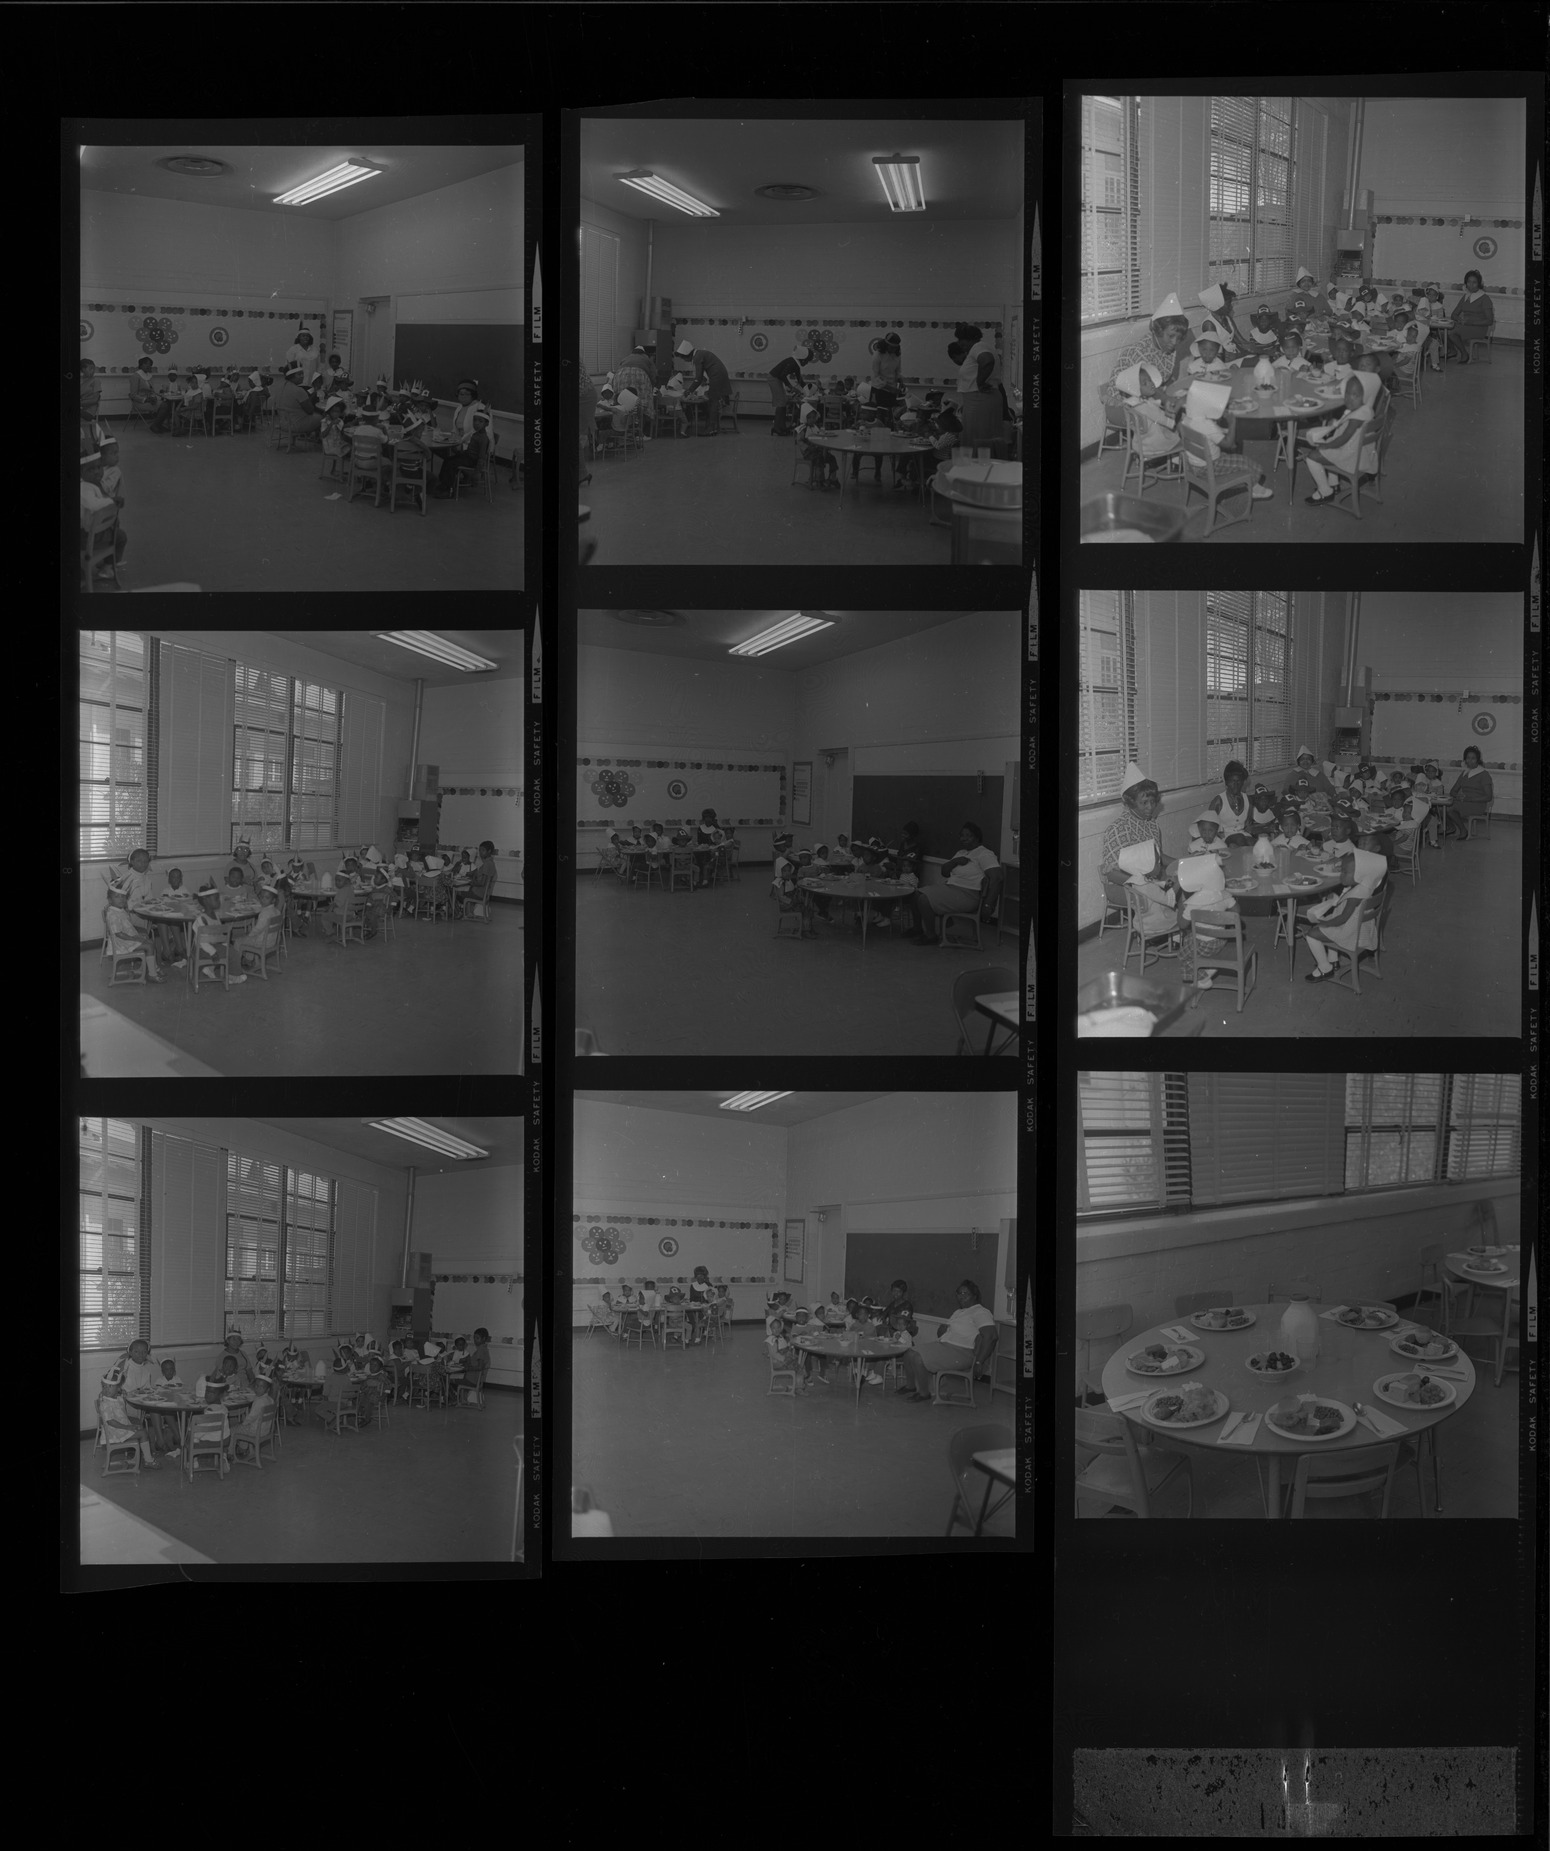 Set of negatives by Clinton Wright including New Jerusalem members in old church, accident at Dunes, Operation Independence Day Care D & Washington Street, 1969, page 1